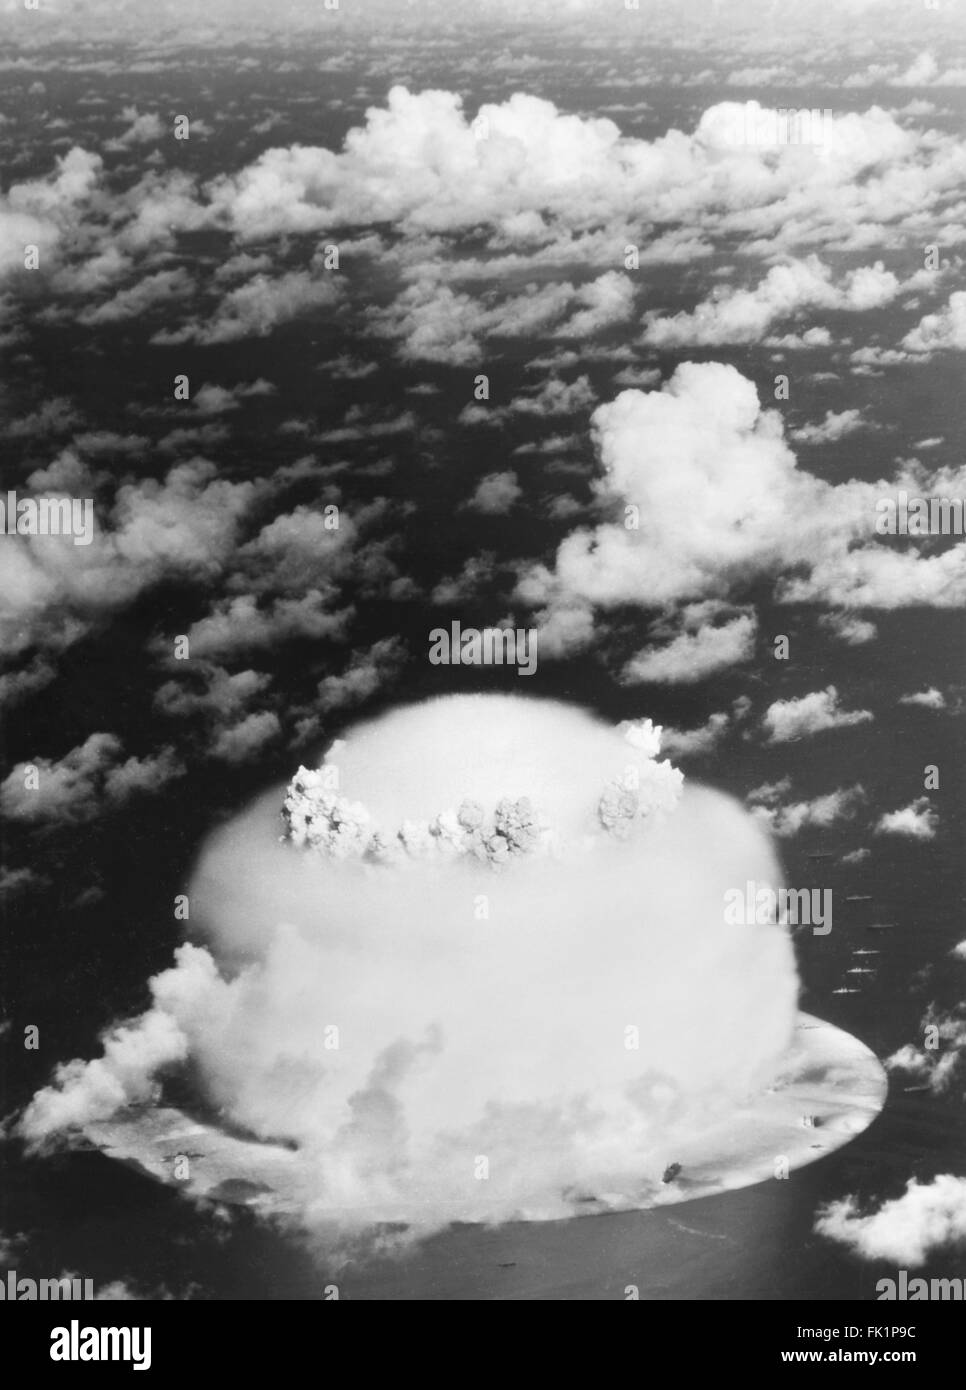 Mushroom cloud from Operation Crossroads nuclear weapons test at Bikini Atoll, Marshall Islands, Pacific Ocean in July/August 1946. Stock Photo